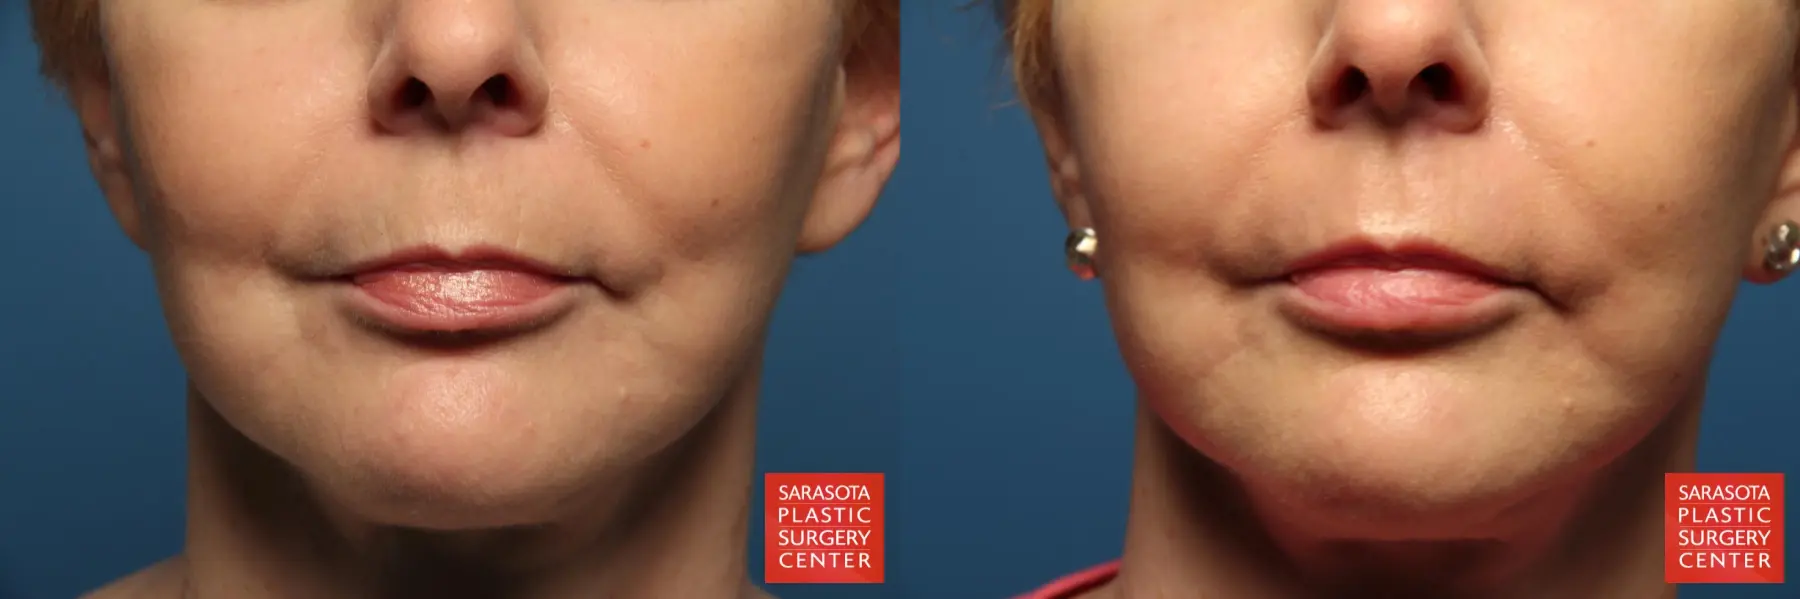 Laser Skin Resurfacing - Face: Patient 5 - Before and After 1